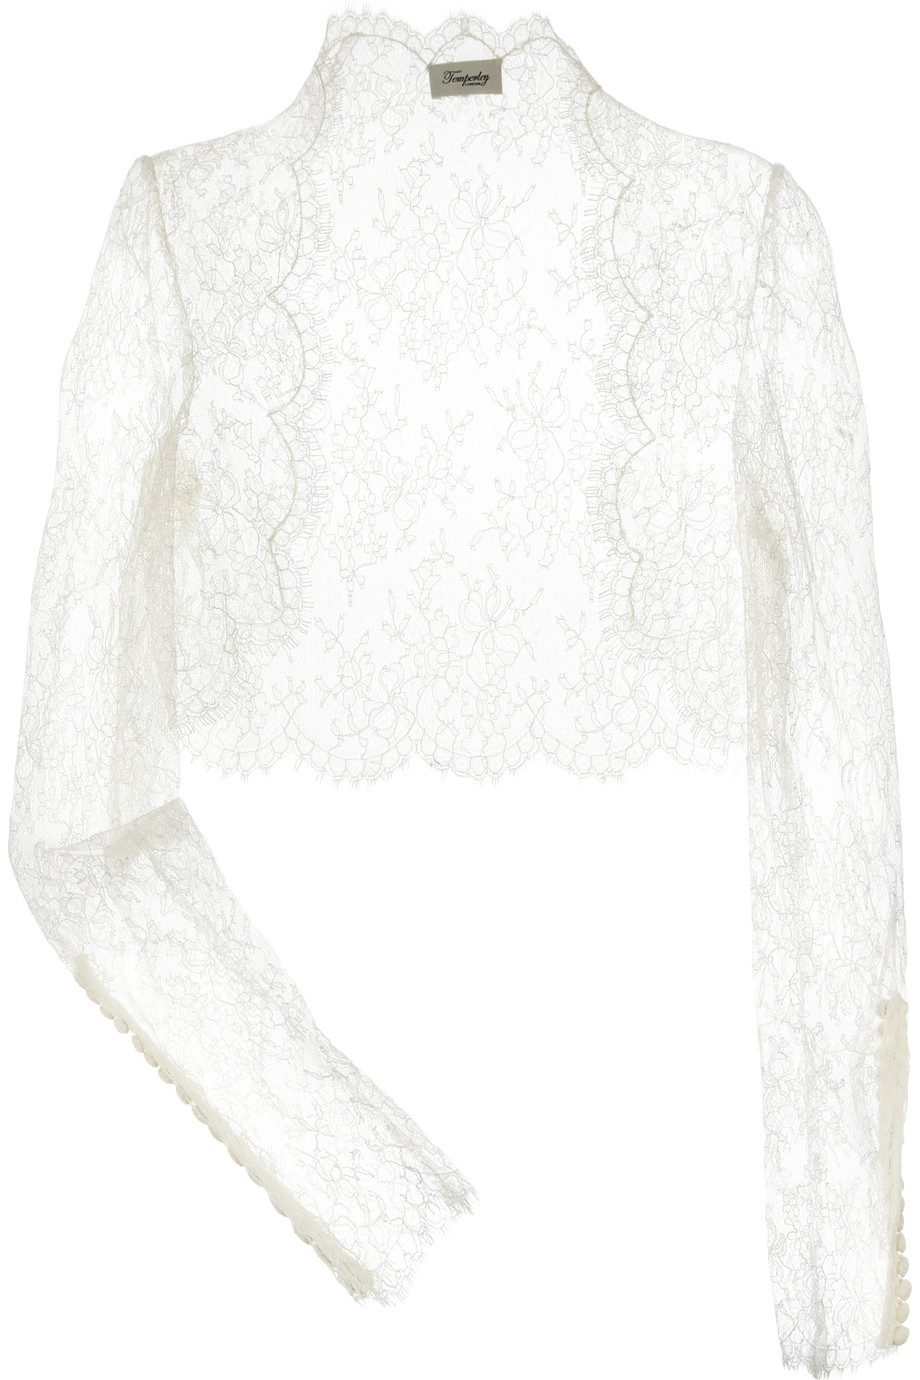 Lyst - Temperley london Selphie Lace Shrug in White